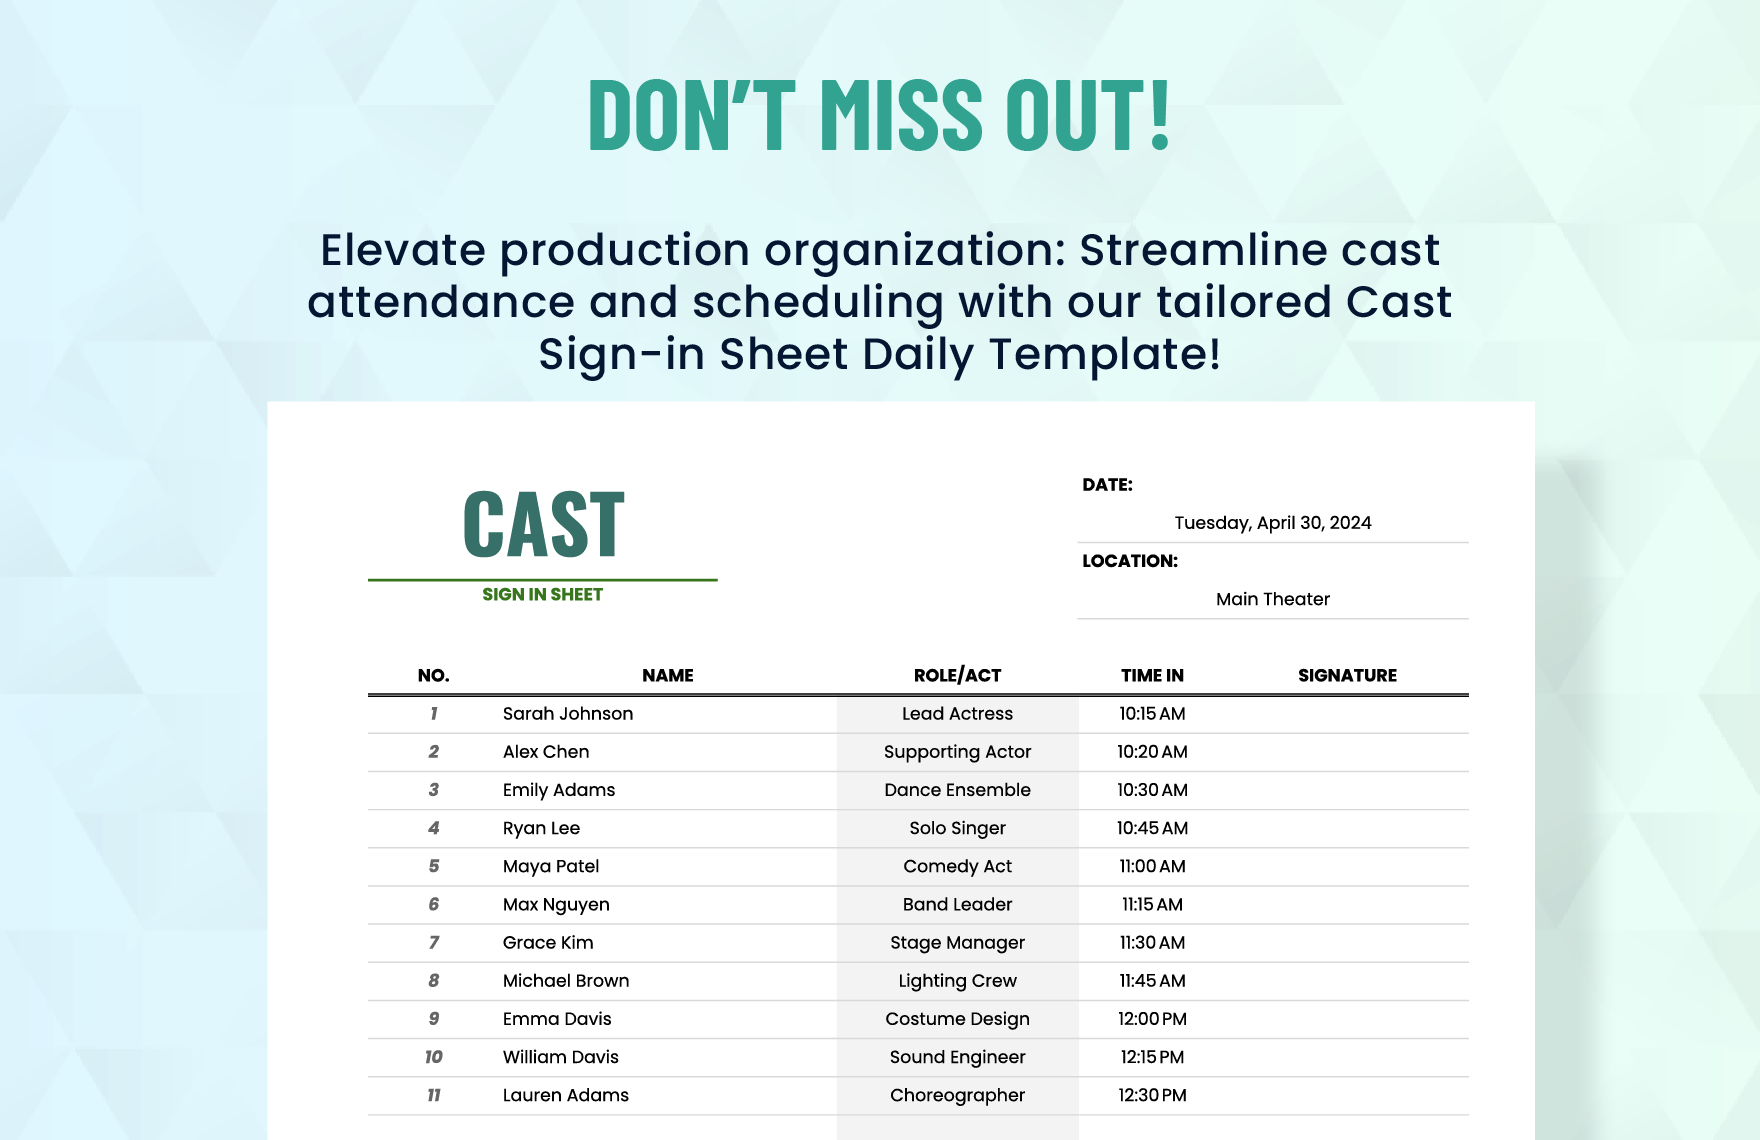 Cast Sign in Sheet Daily Template